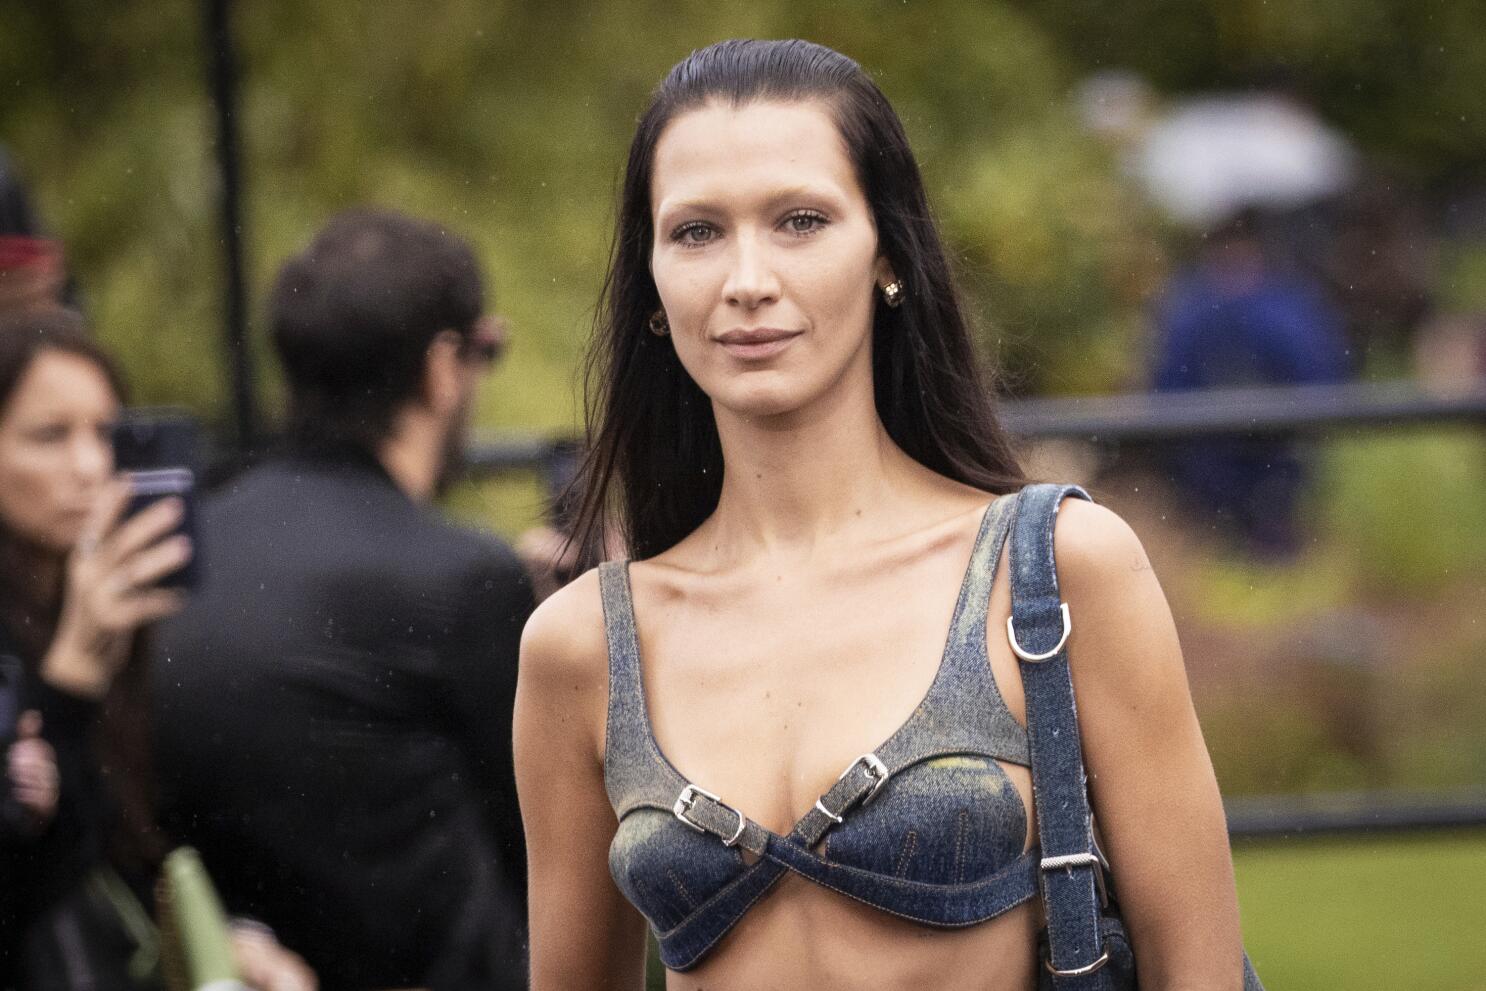 Bella Hadid Opens Up About Her Ongoing Health Struggles: 'I'll Be Back When  I'm Ready